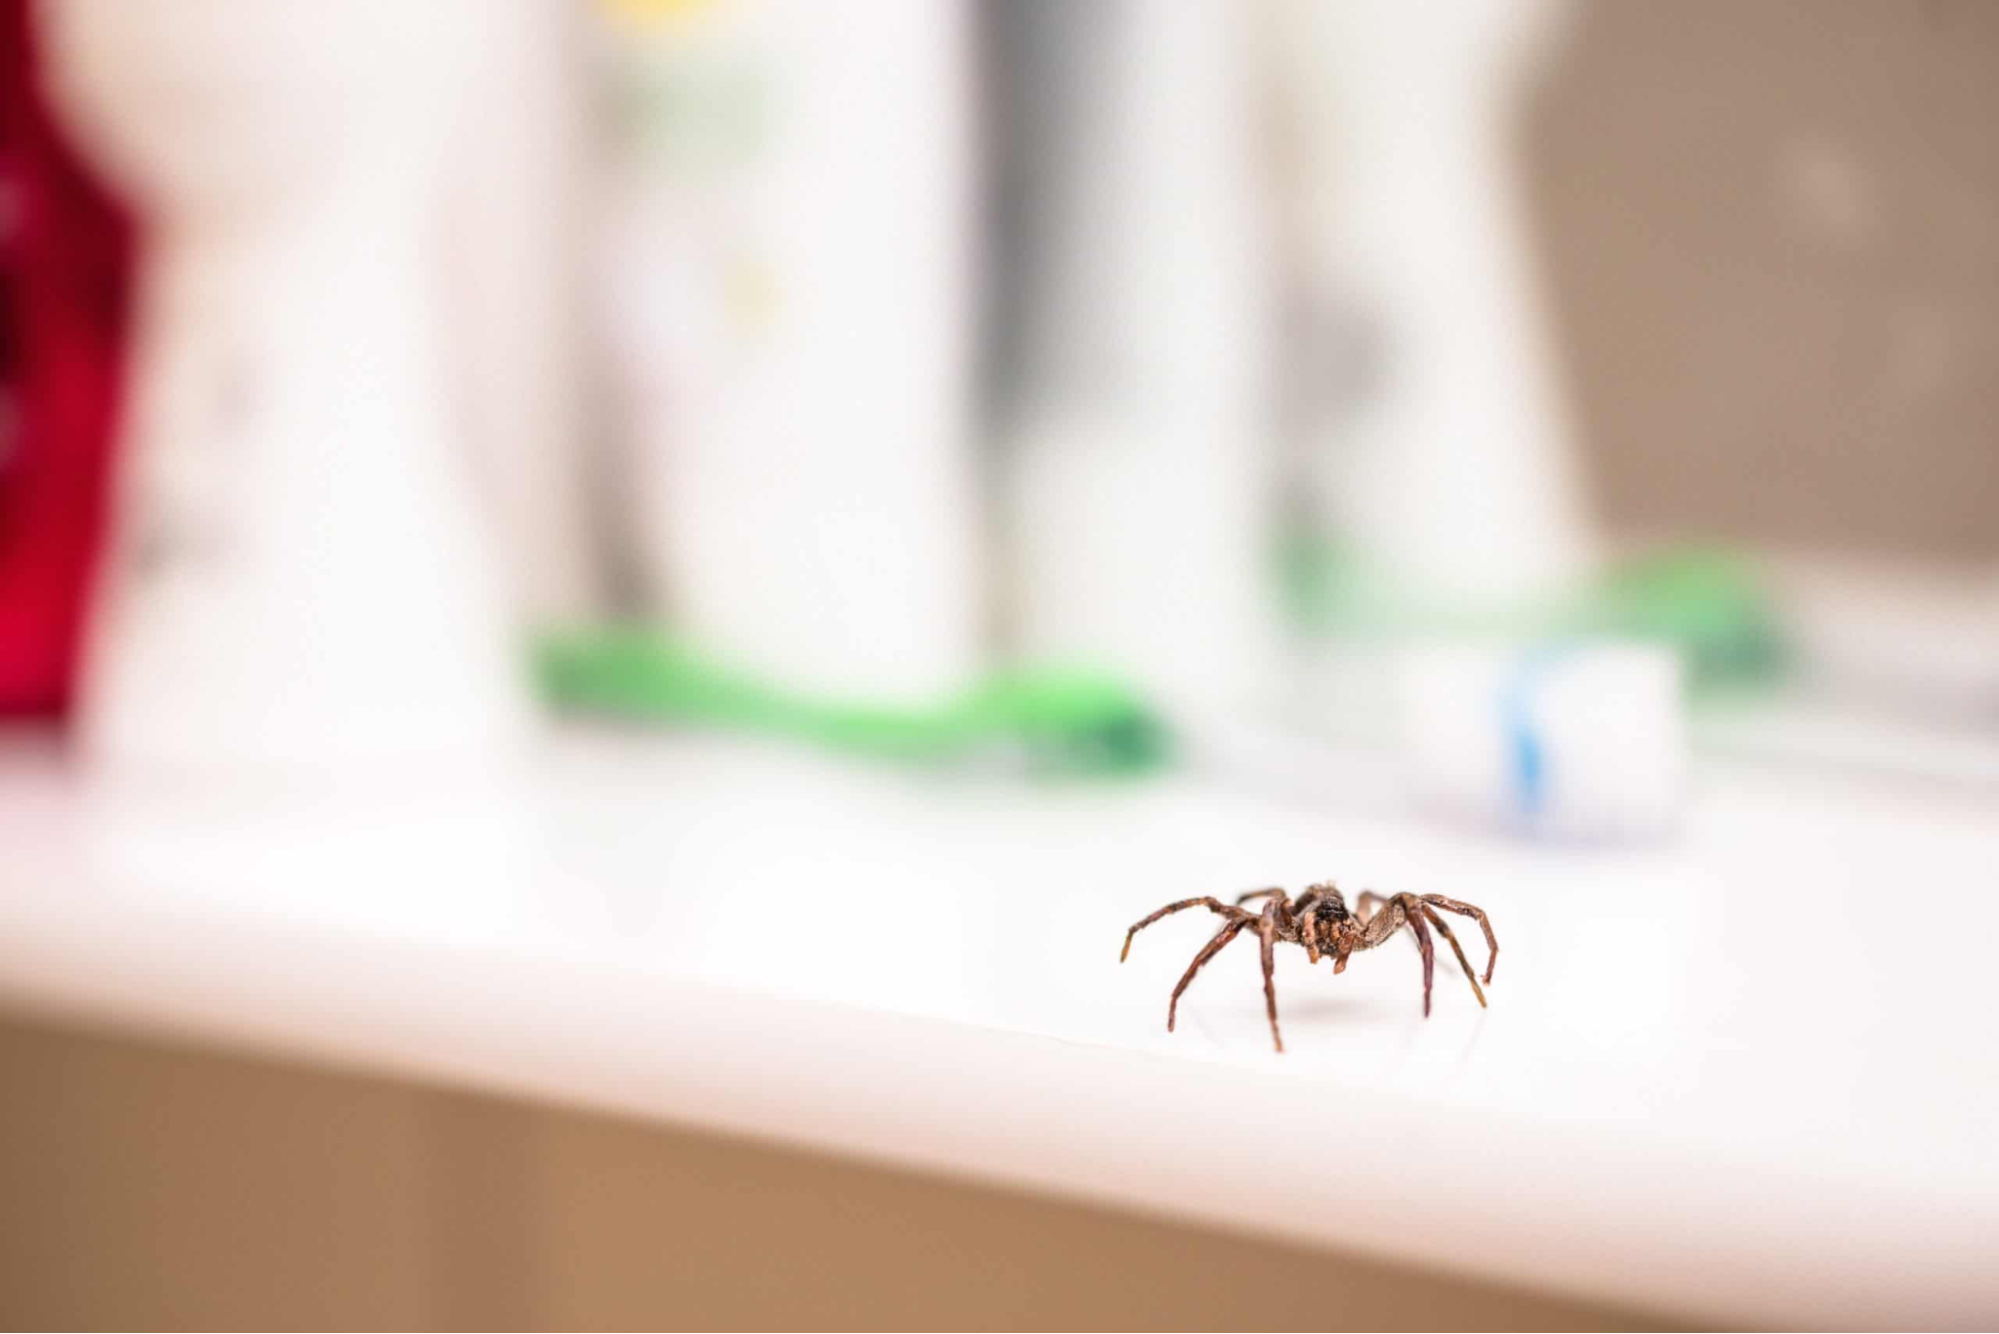 Prevent spiders in bathroom with natural remedies and traps